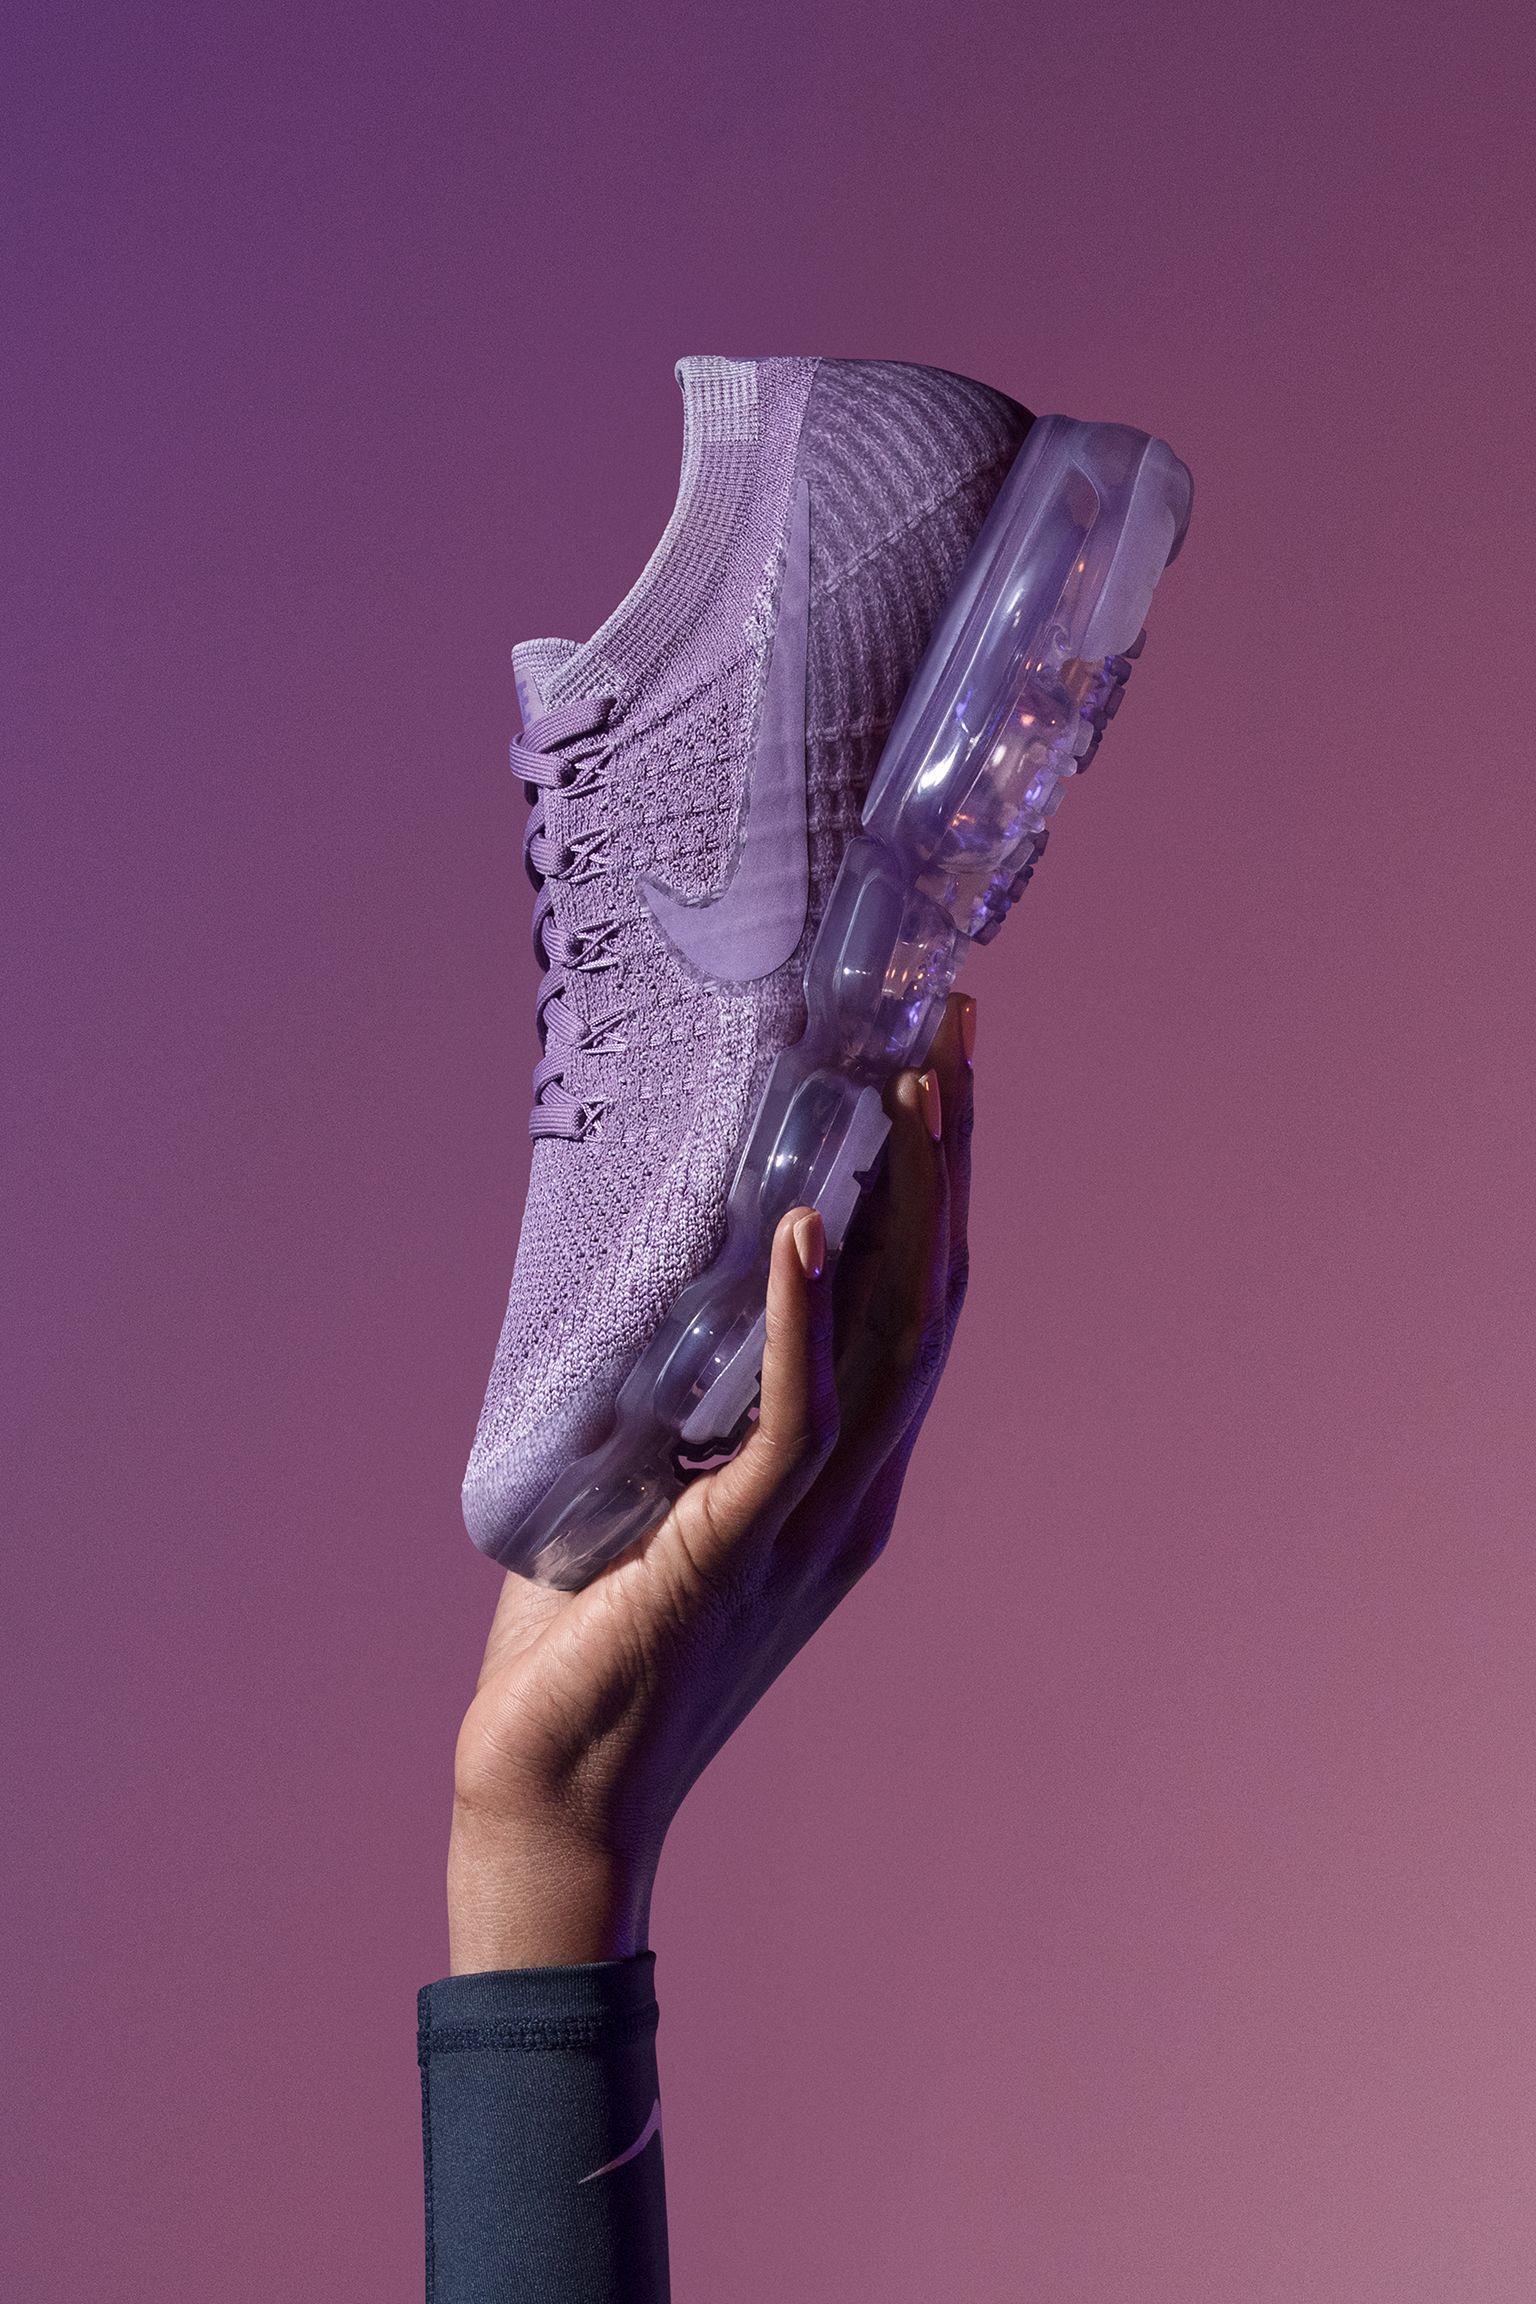 Nike VaporMax Flyknit Day to Night "Violet Dust" para Nike SNKRS